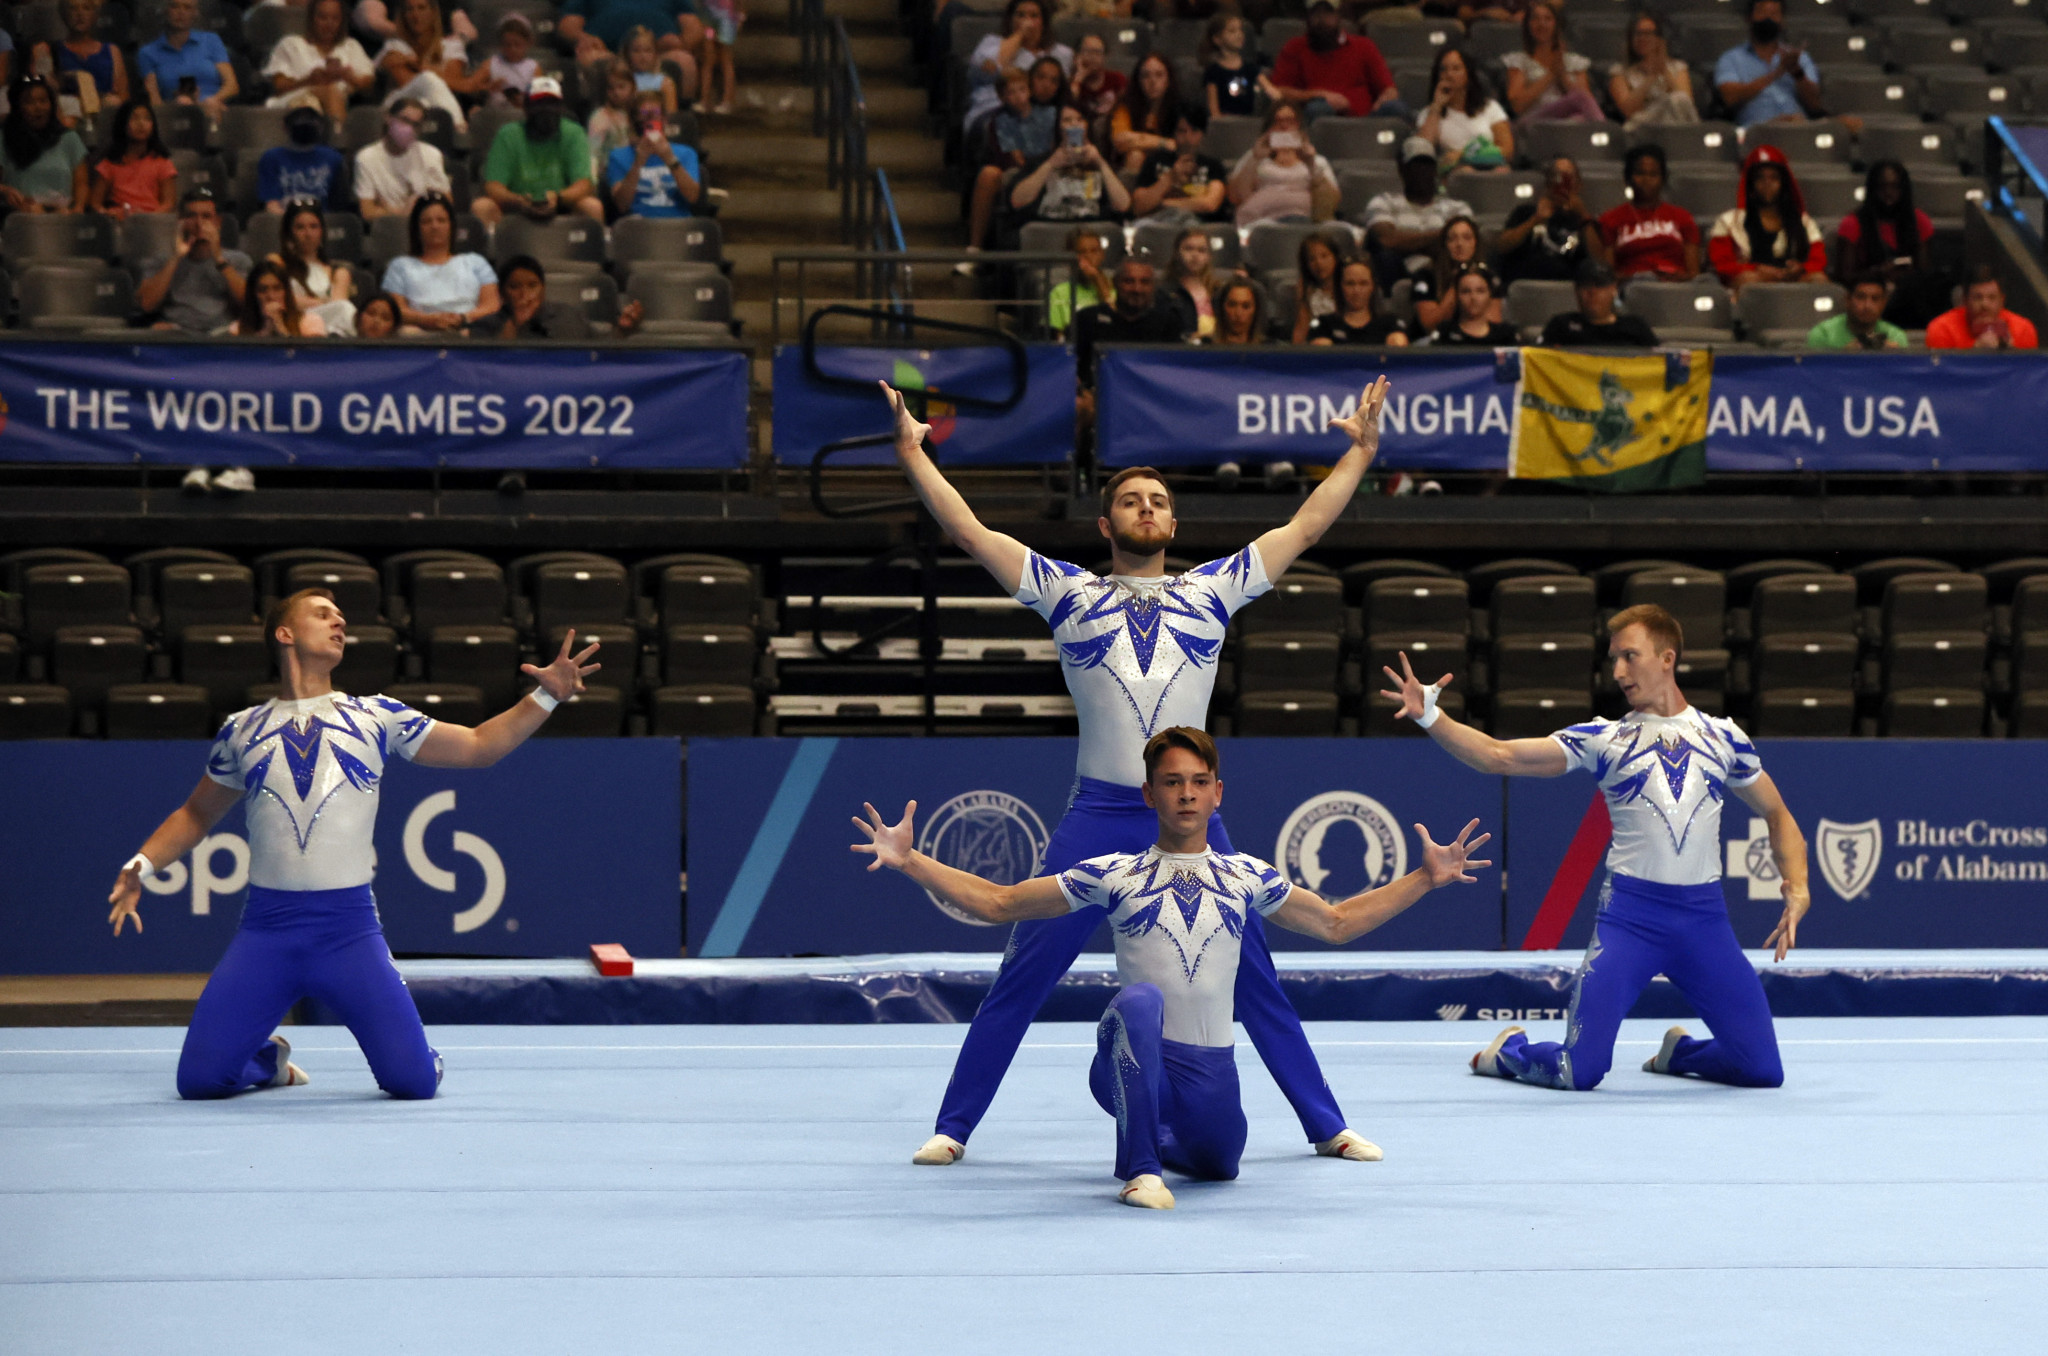 The men's group event was the final acrobatic gymnastics discipline to be staged at Birmingham 2022 ©The World Games